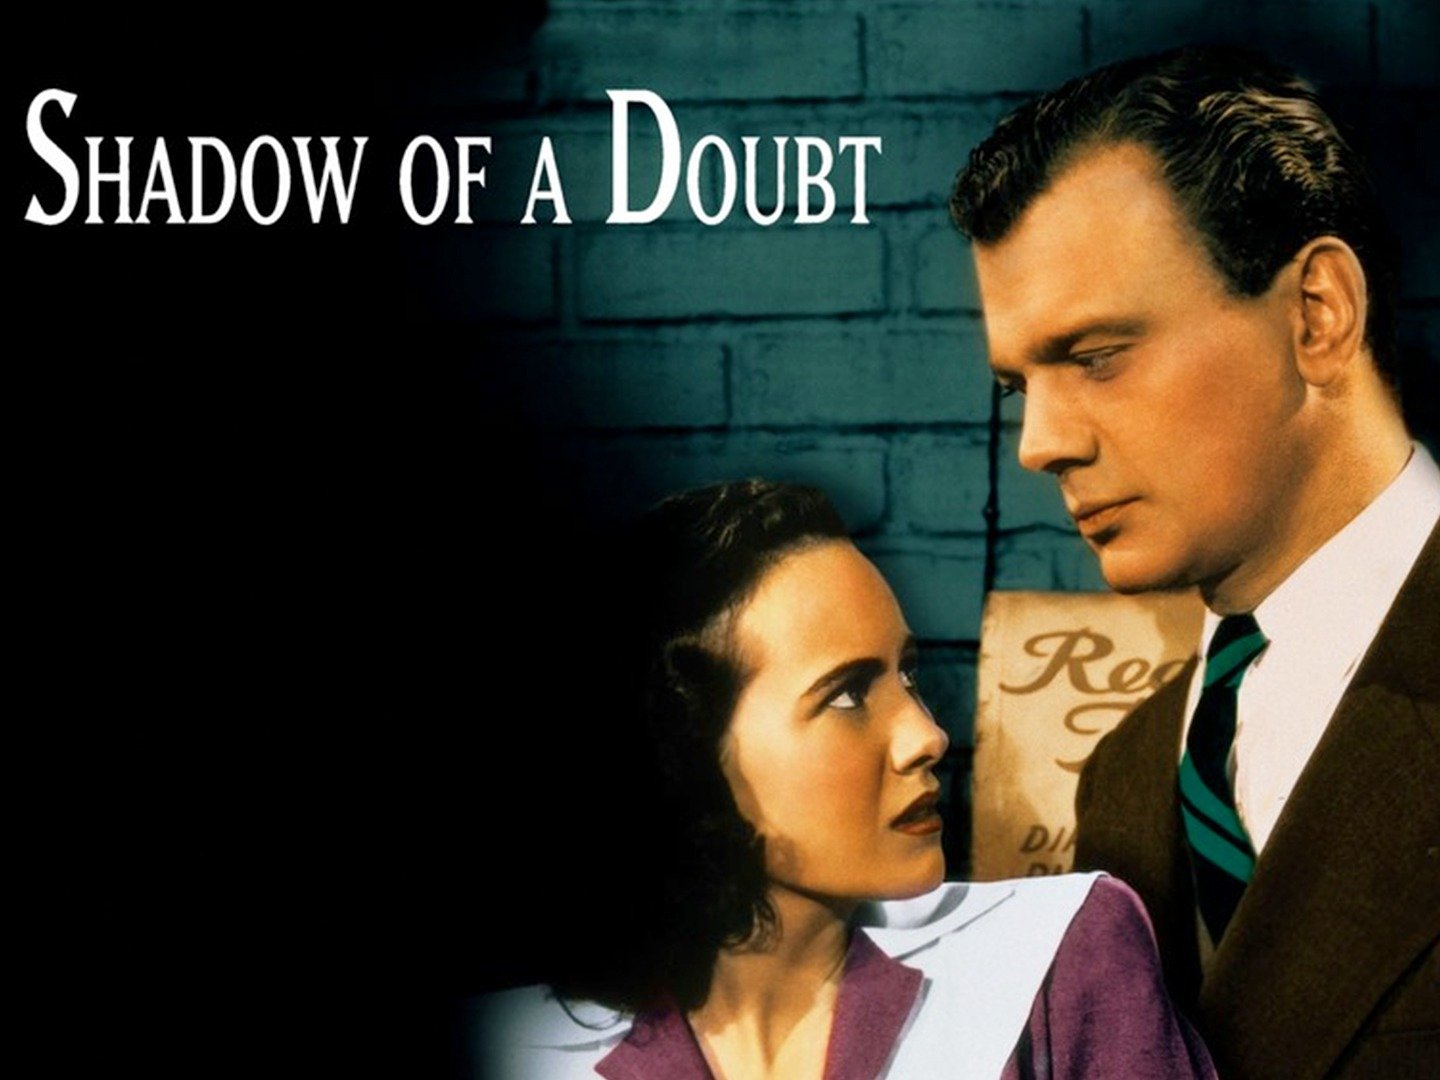 shadow of a doubt movie dancing meaning